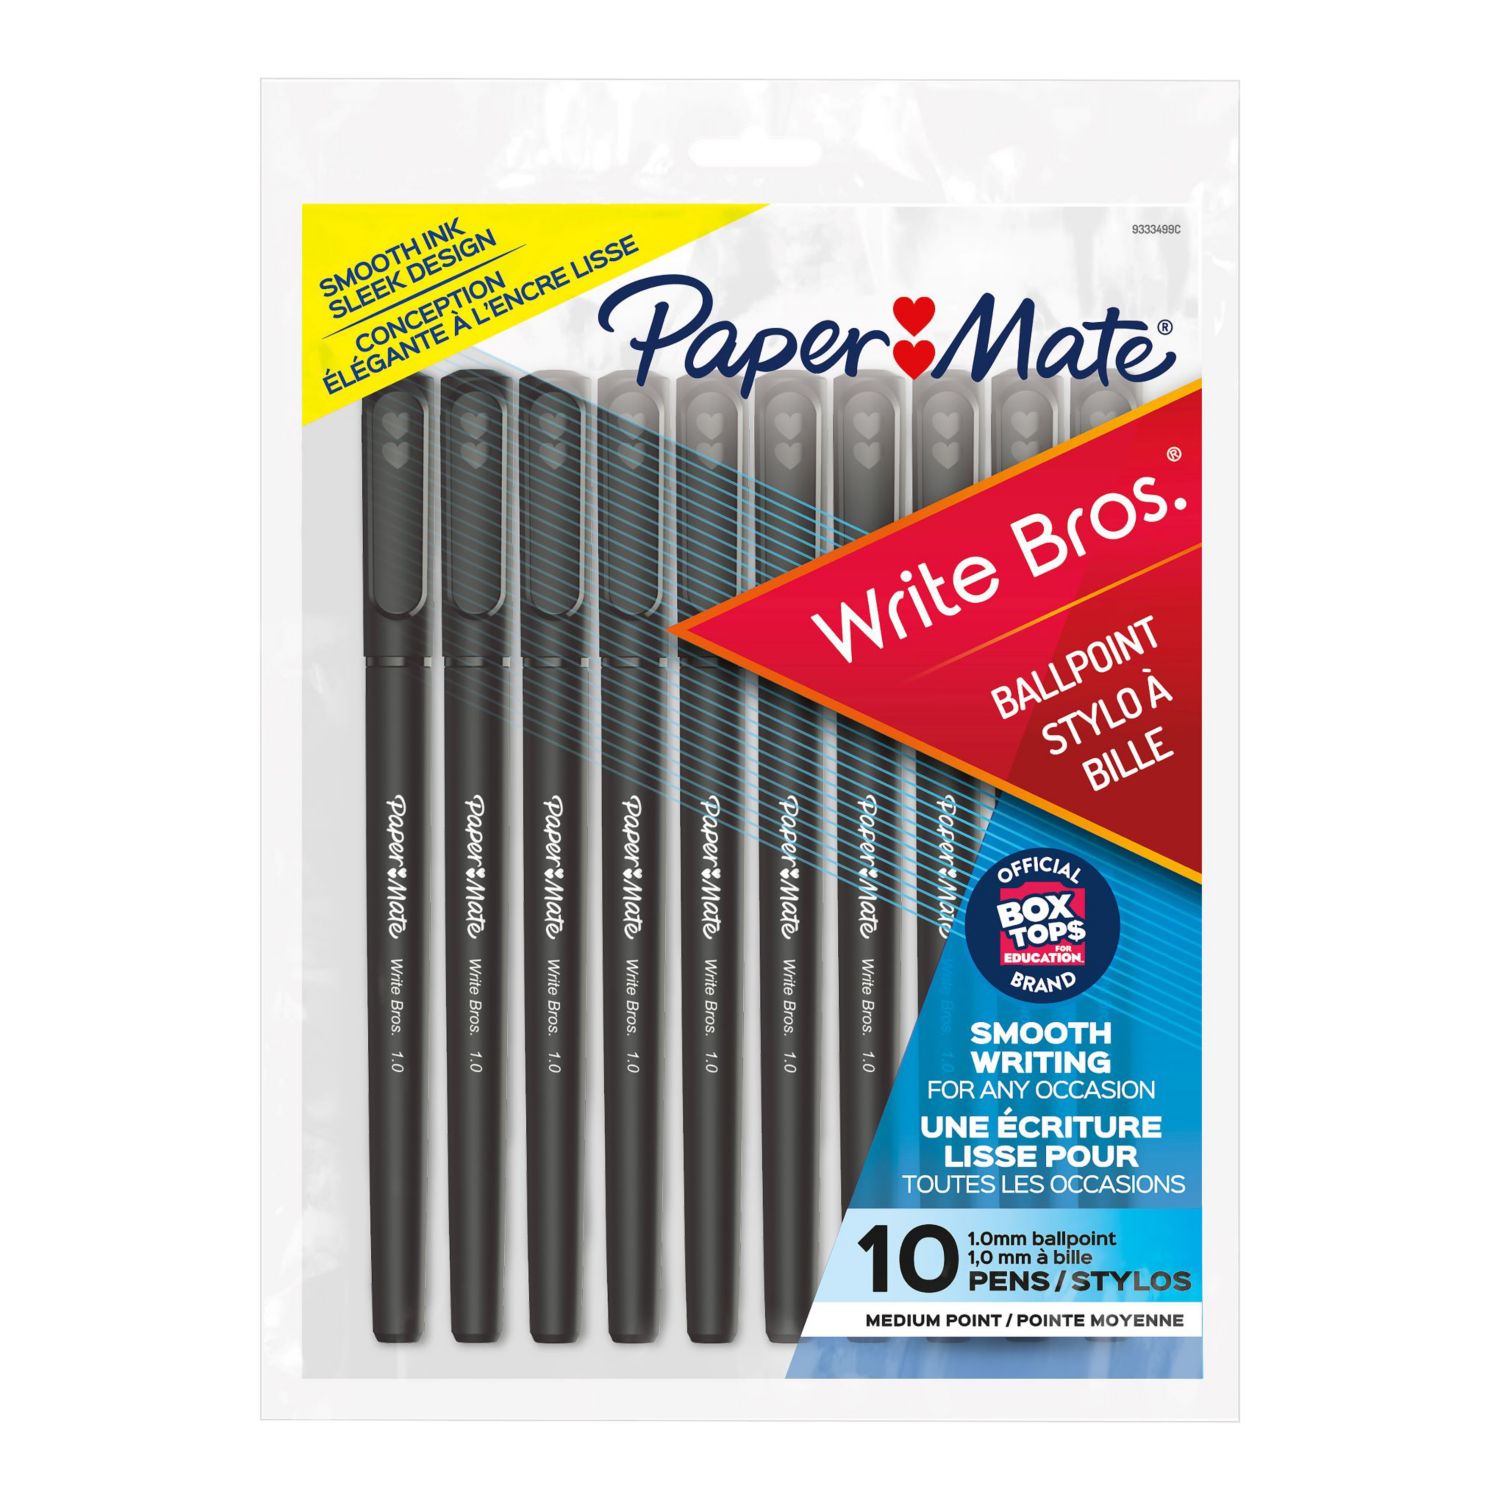 Papermate Black Capped Ball Point Pens